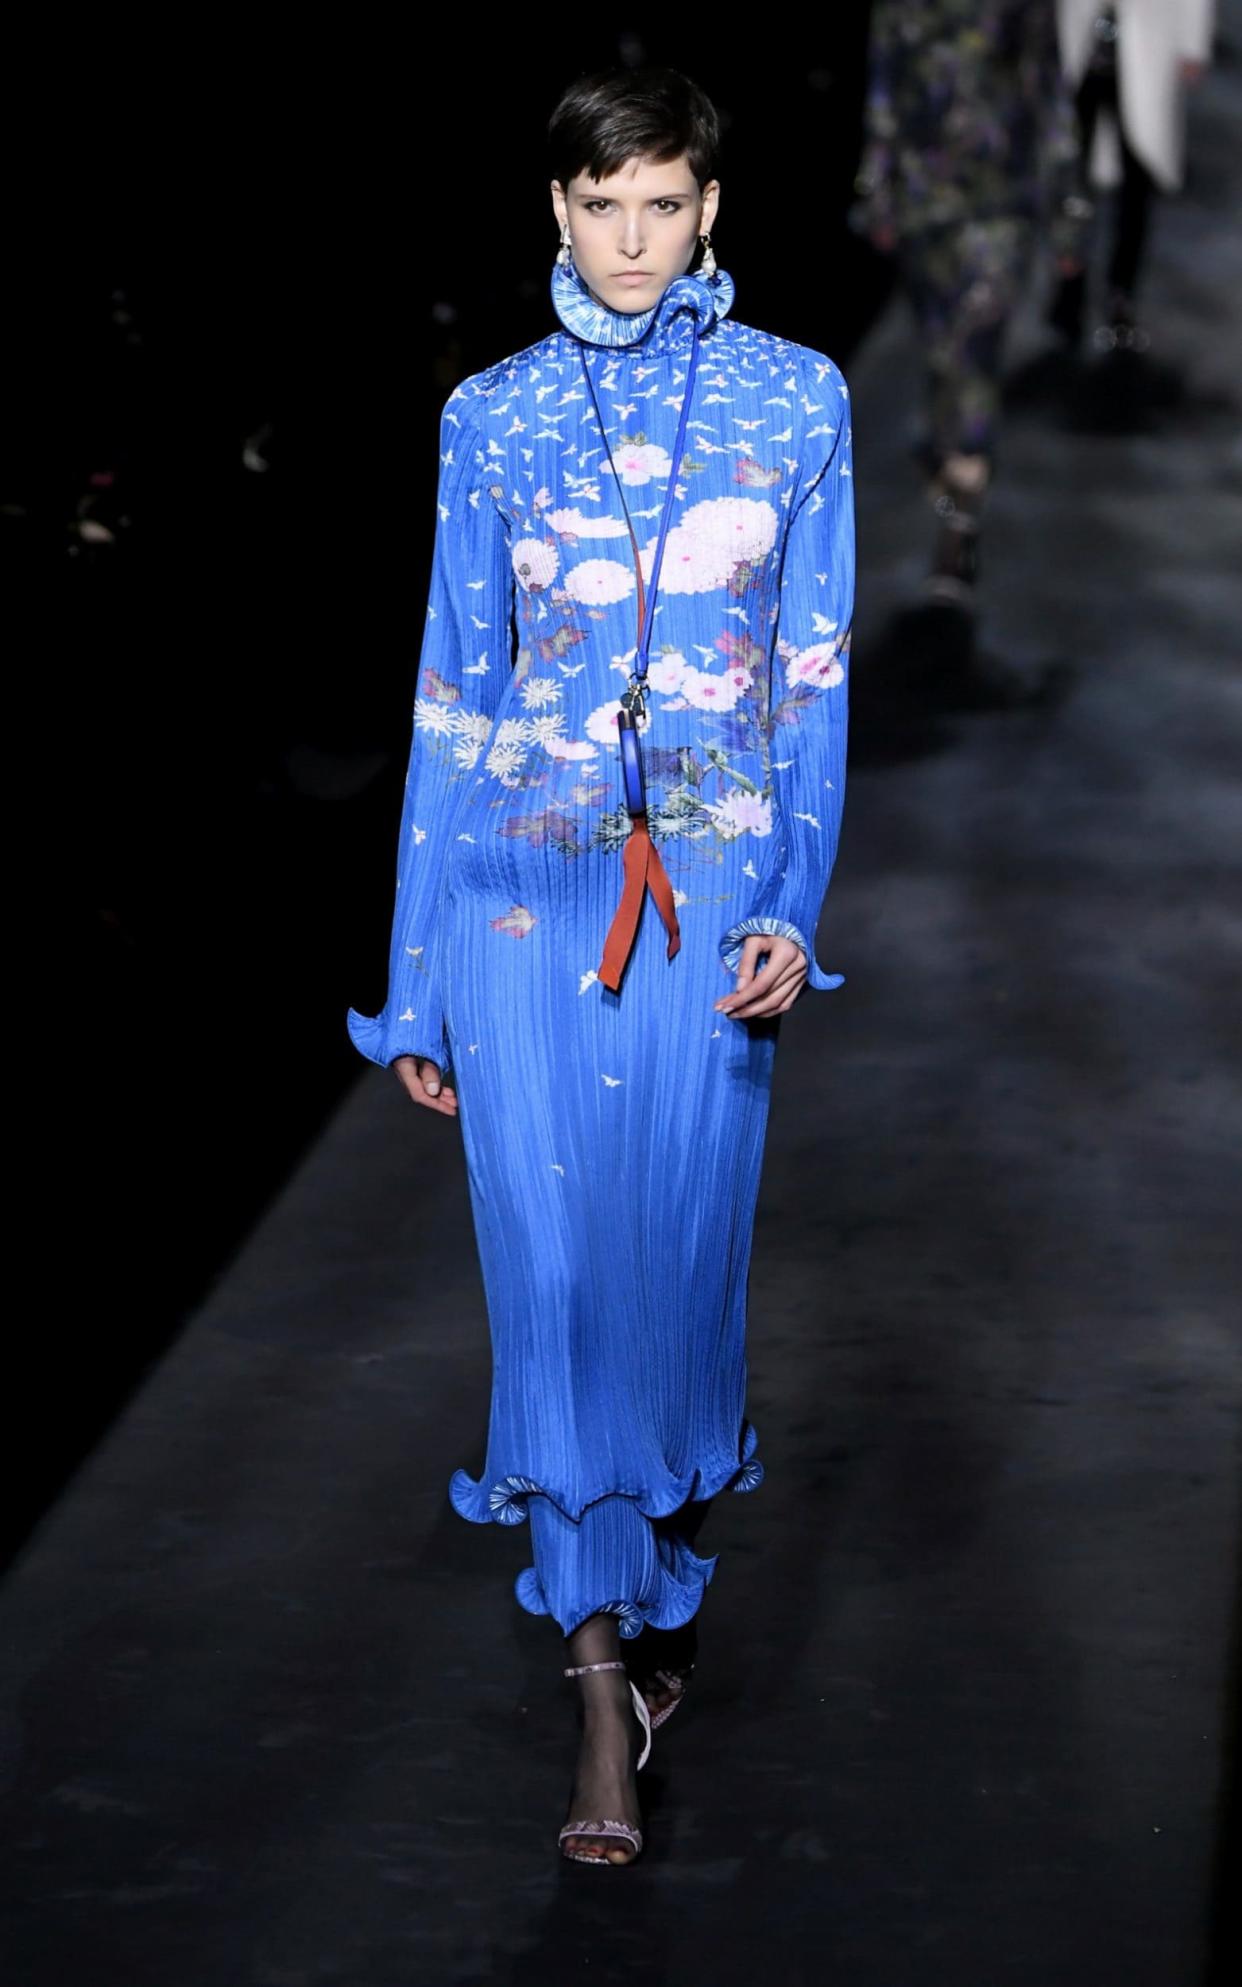 A model wears a printed blue plisse dress at Givenchy  - WireImage